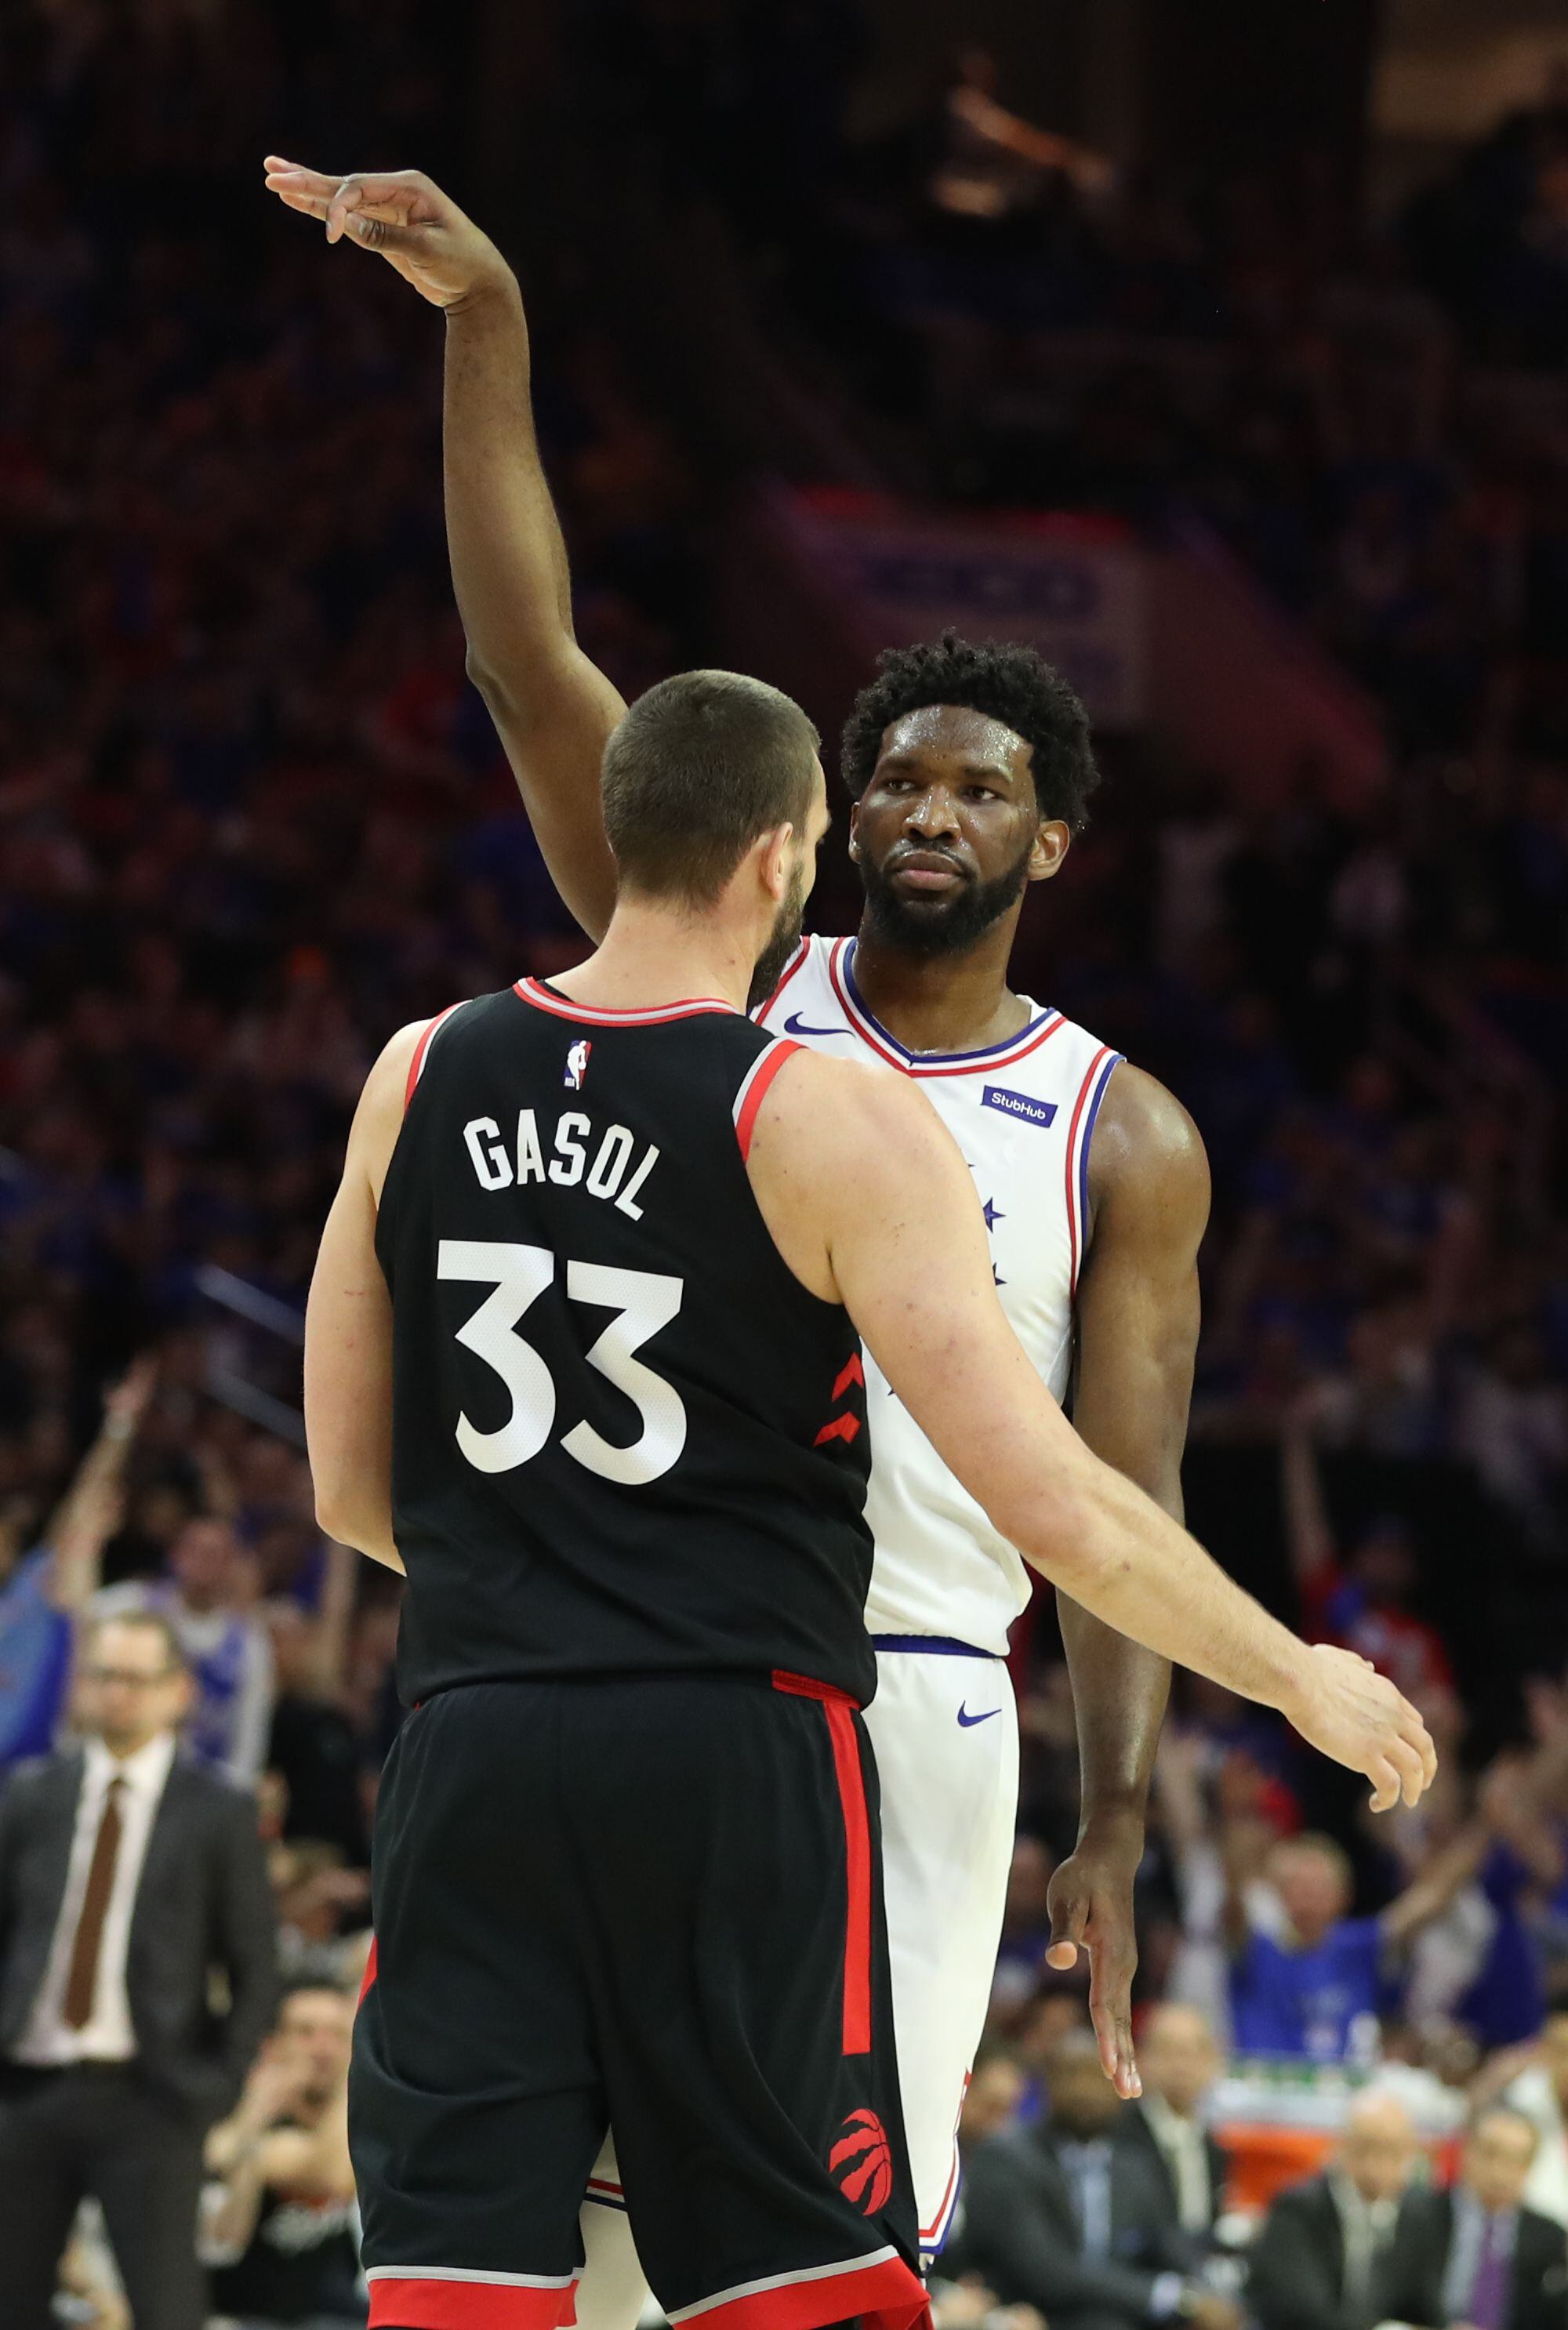 NBA All-Star: Clippers' J.J. Redick preparing for 3-point contest in a  unique way – Daily News